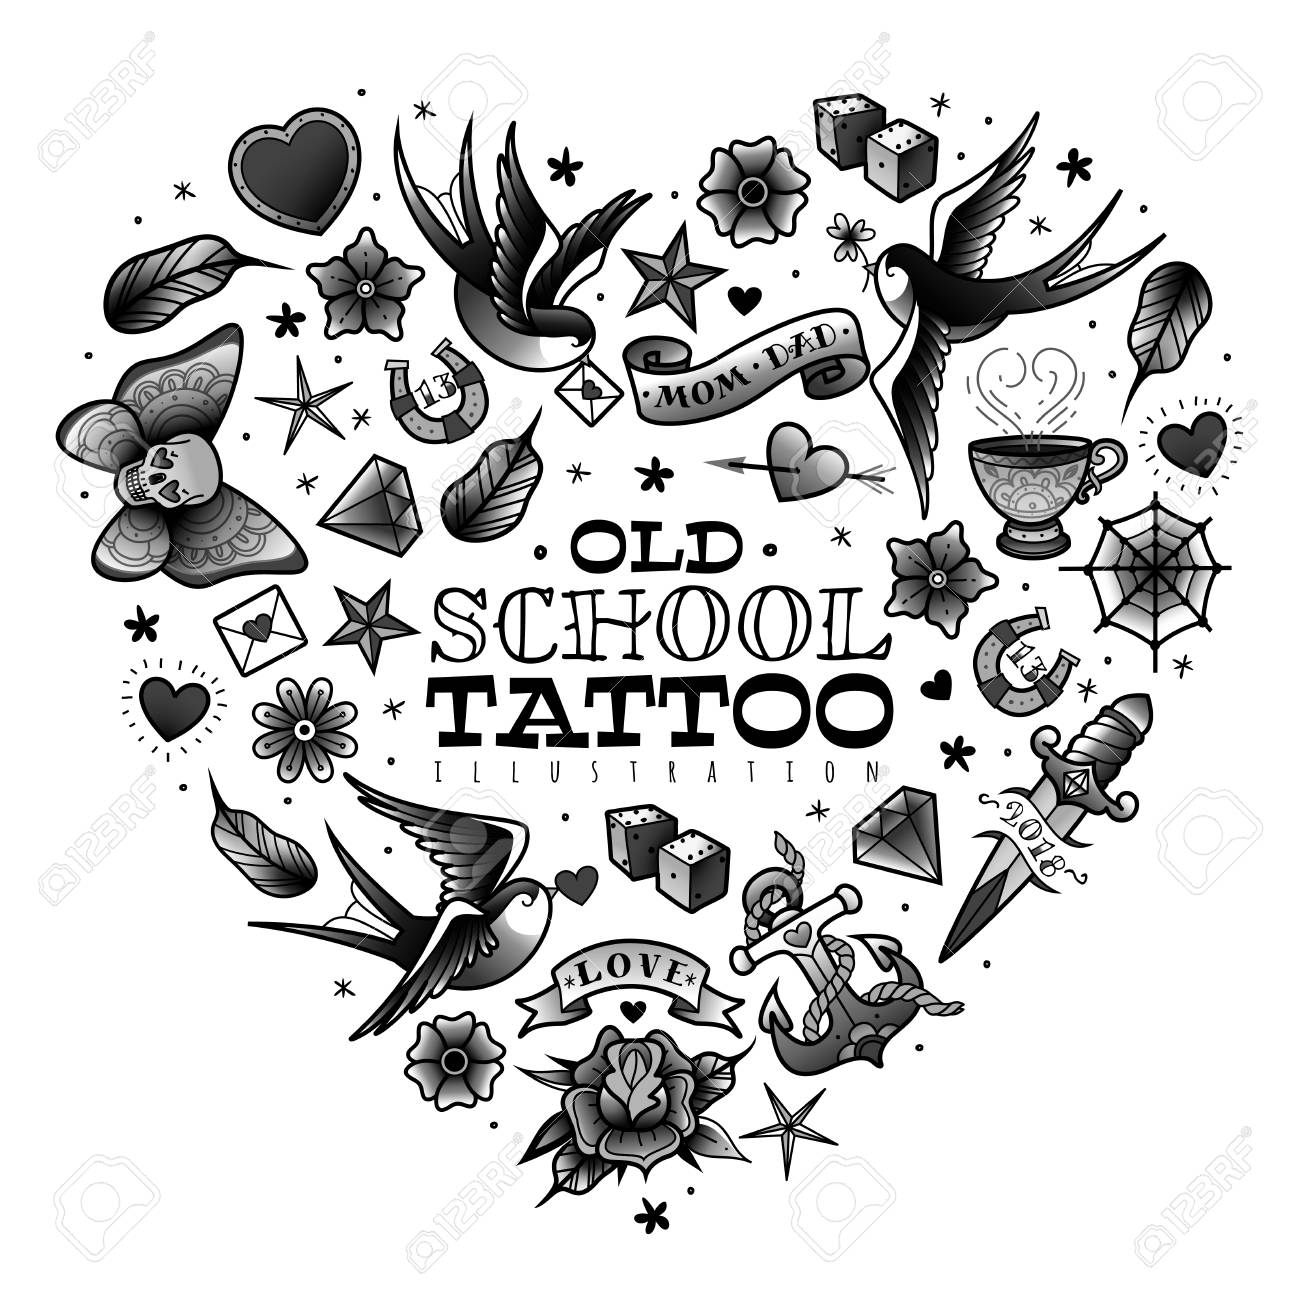 A Large Set Of Isolated Old School Tattoo Elements On White